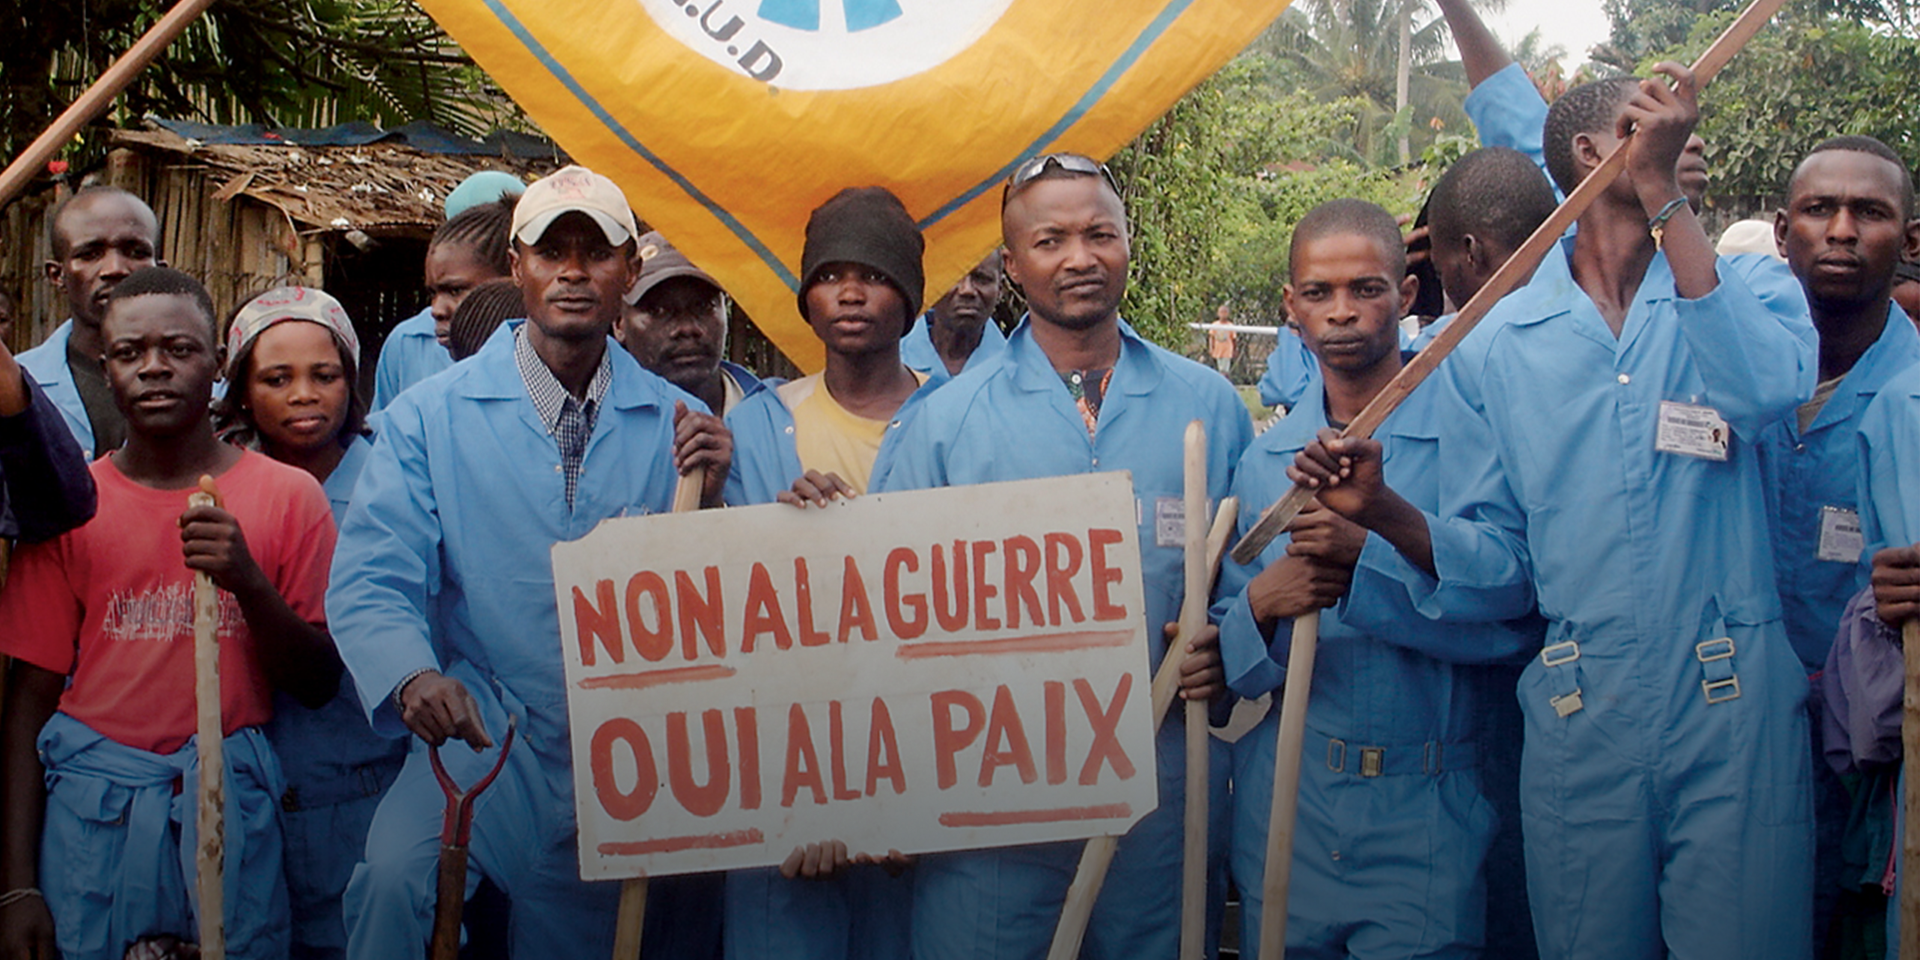 A group of men dressed in blue hold a sign asking for peace